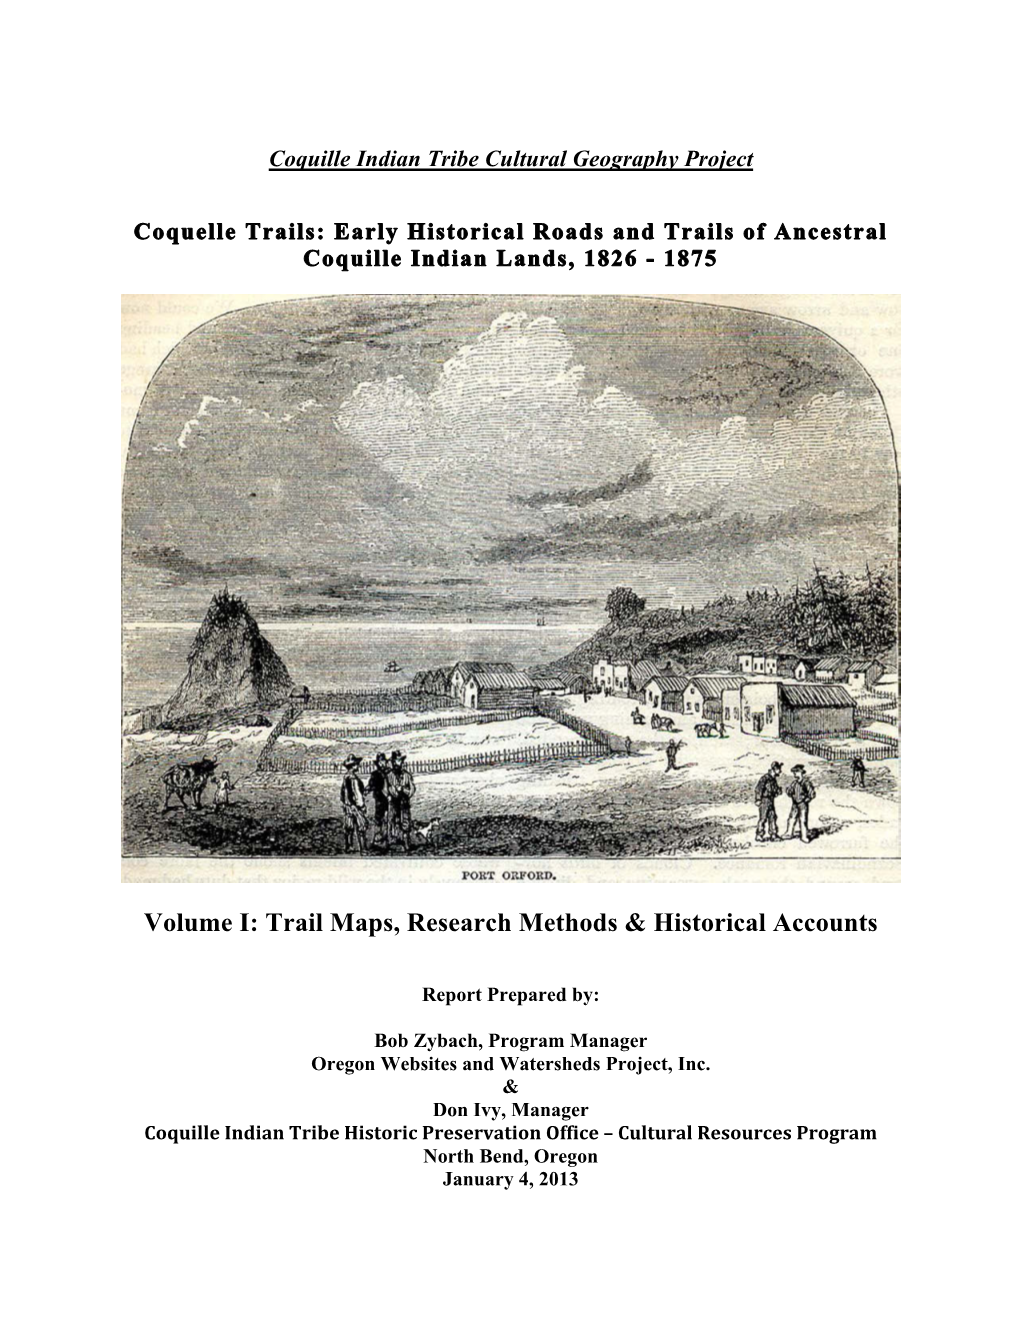 Volume I: Trail Maps, Research Methods & Historical Accounts